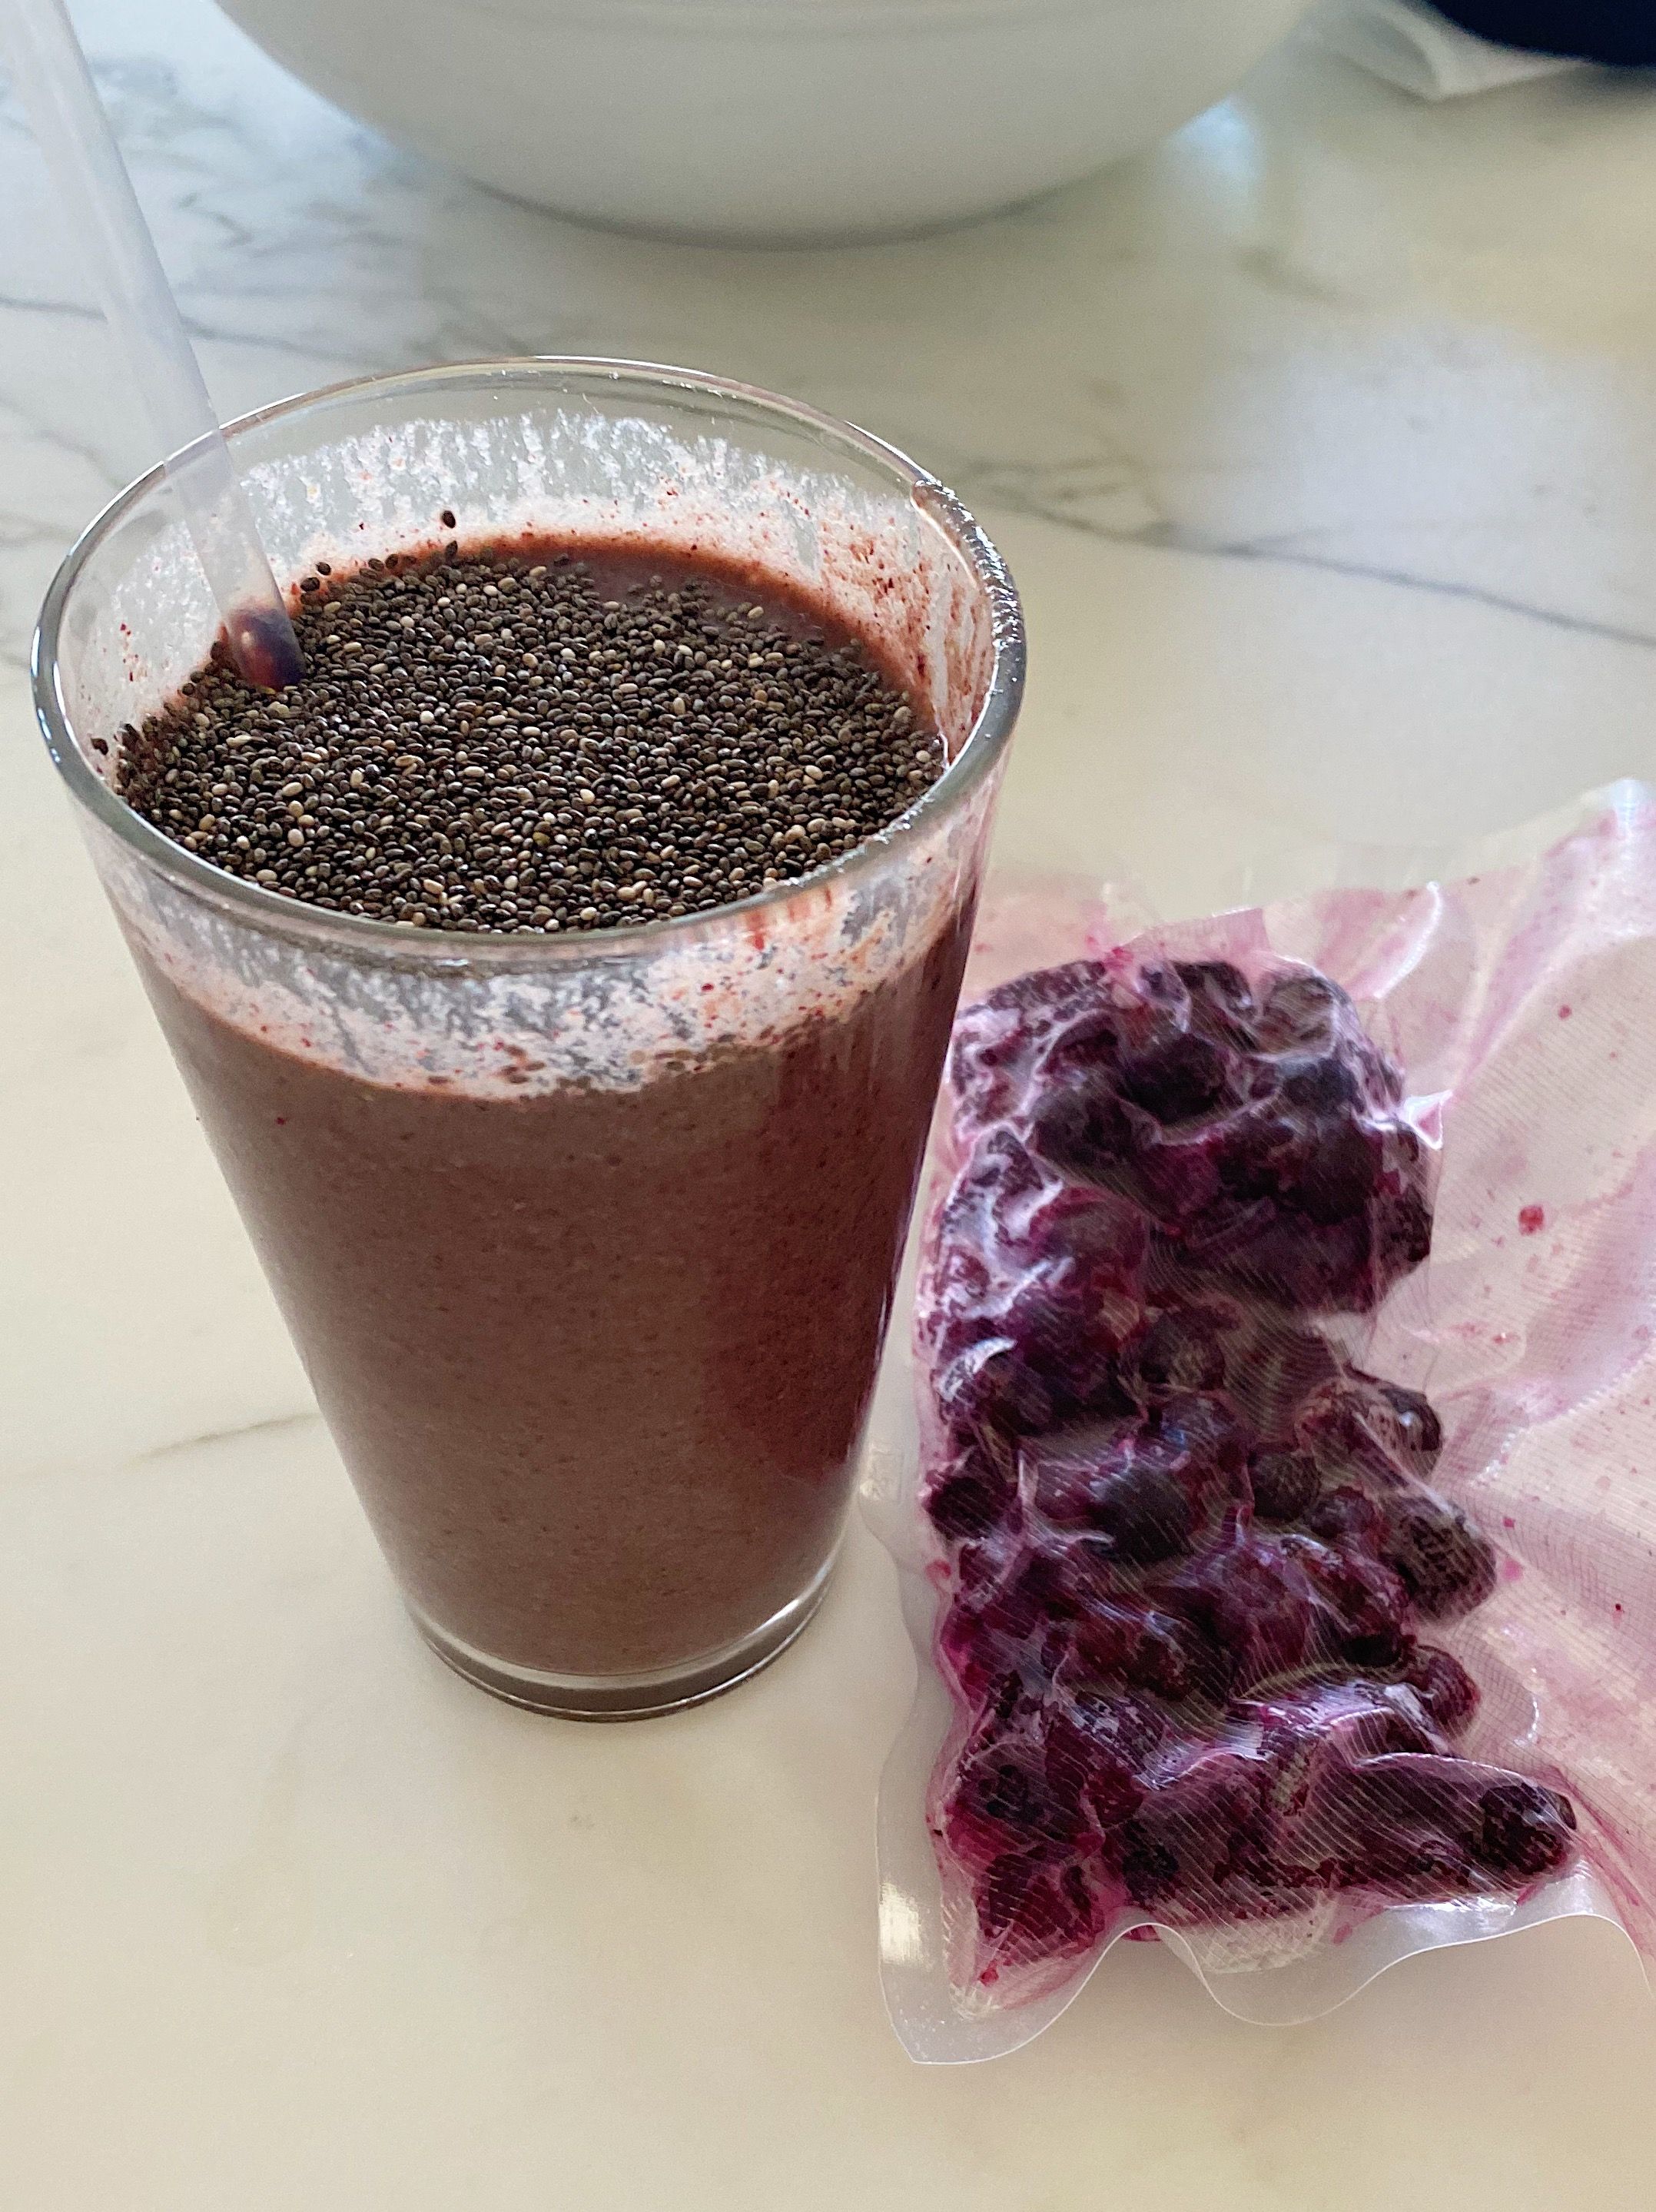 A smoothie made with lacto-fermented blueberries